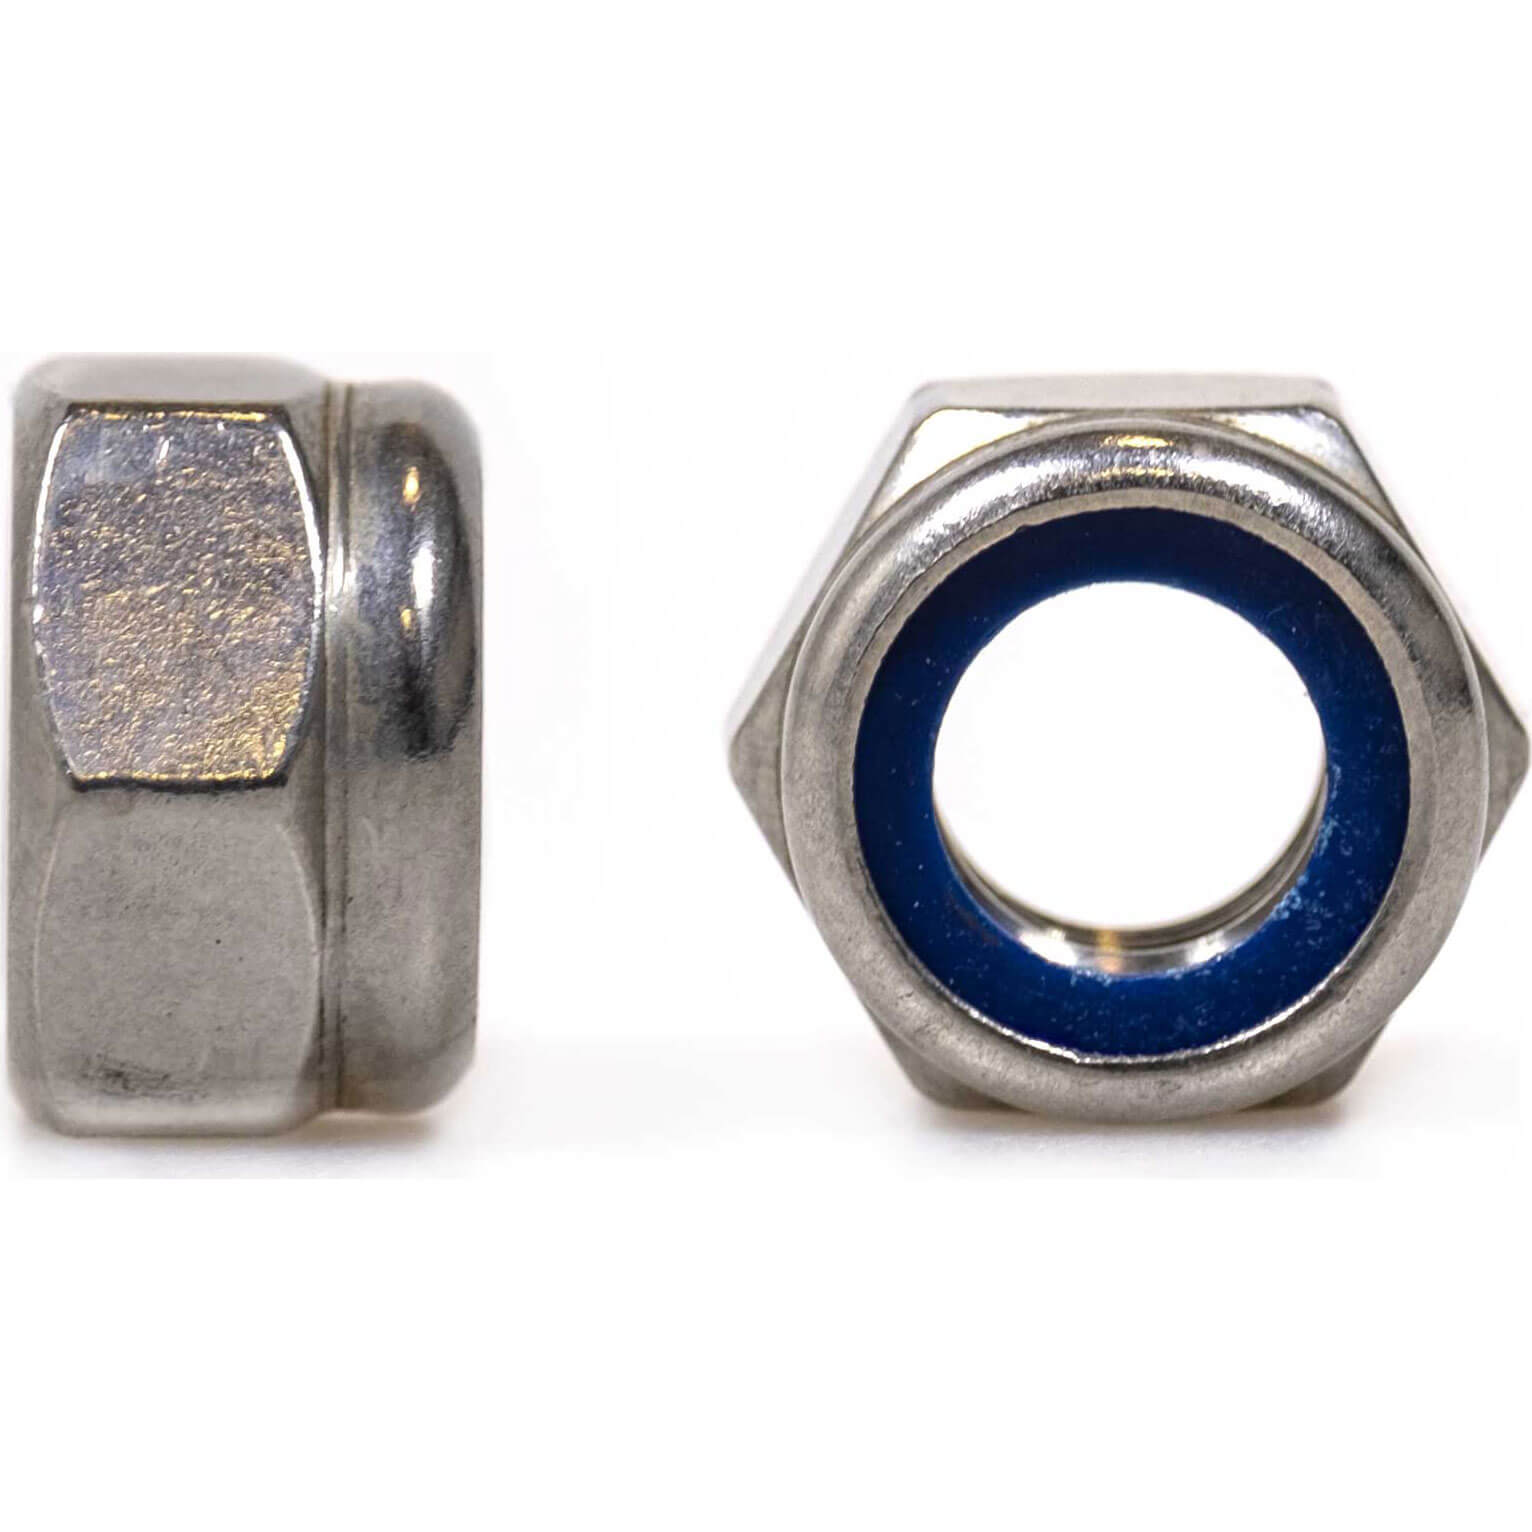 Image of Sirius A2 304 Stainless Steel Hexagon Lock Nuts M5